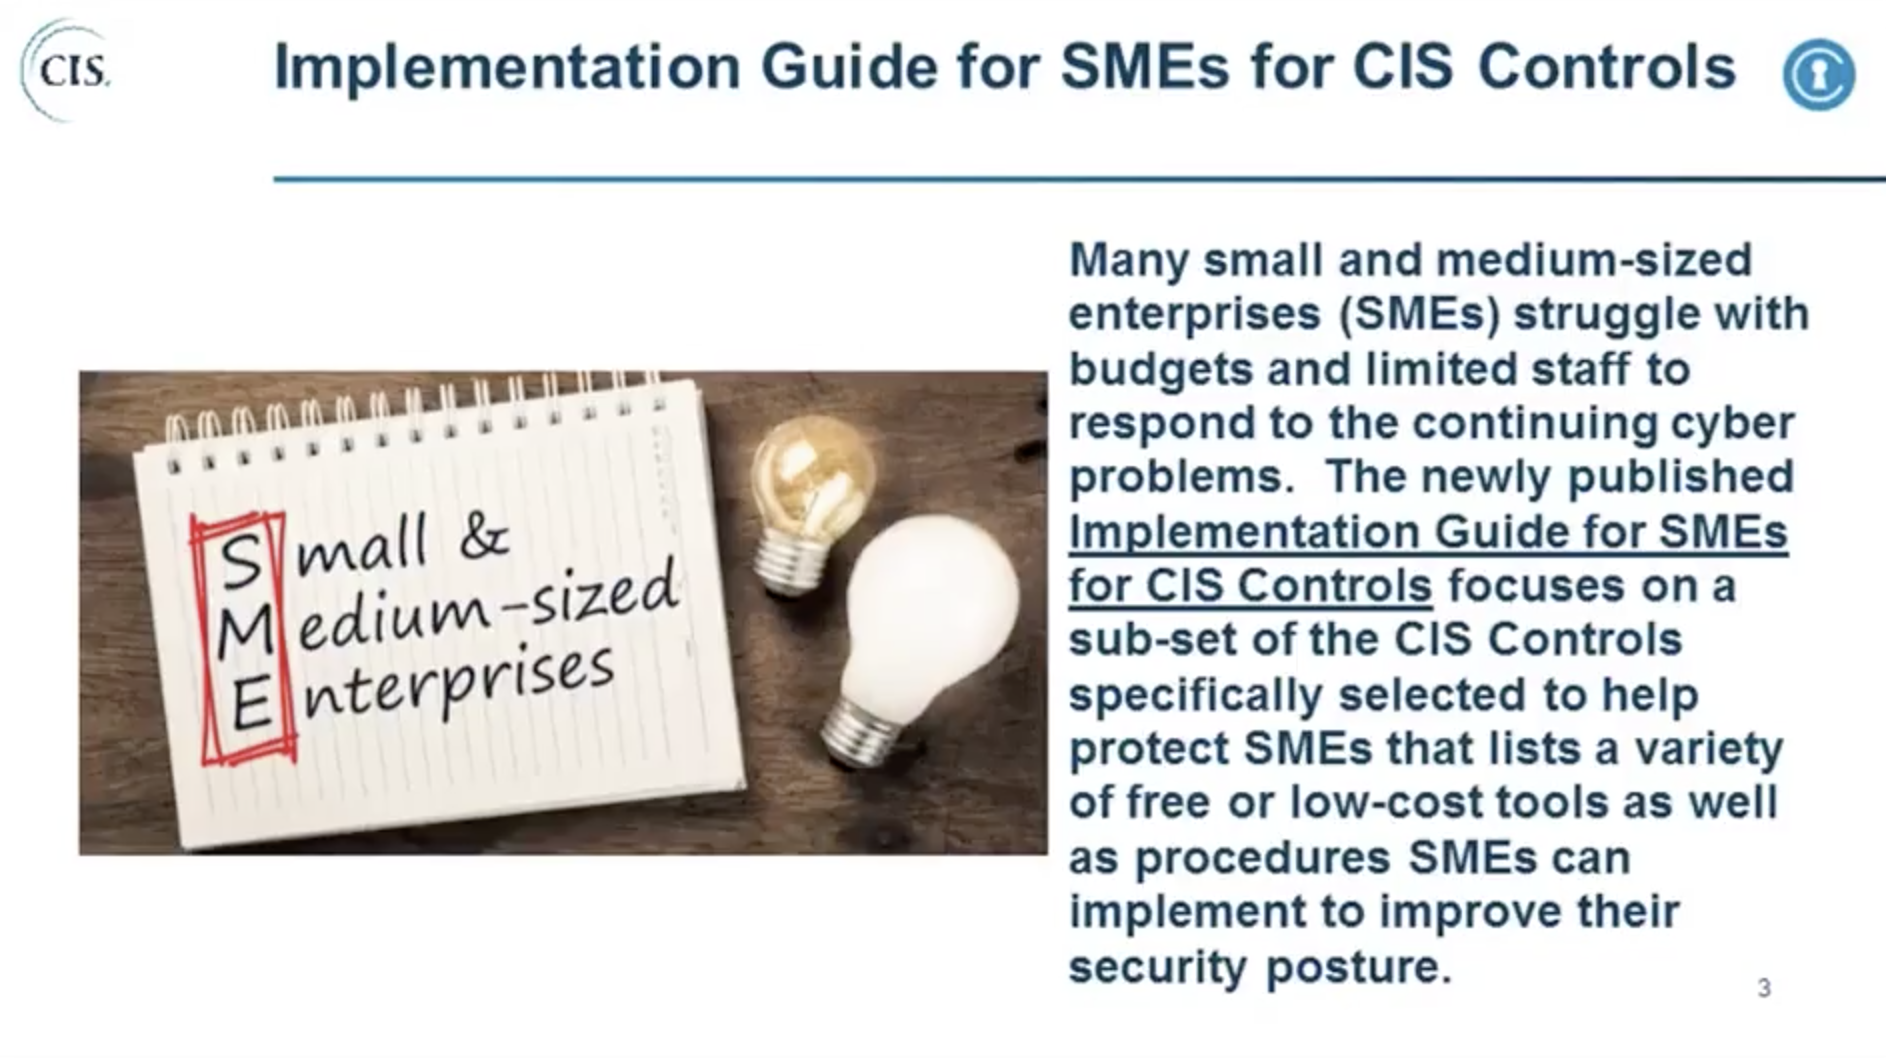 Cybersecurity for Small and Medium-Sized Enterprises Using the CIS Controls